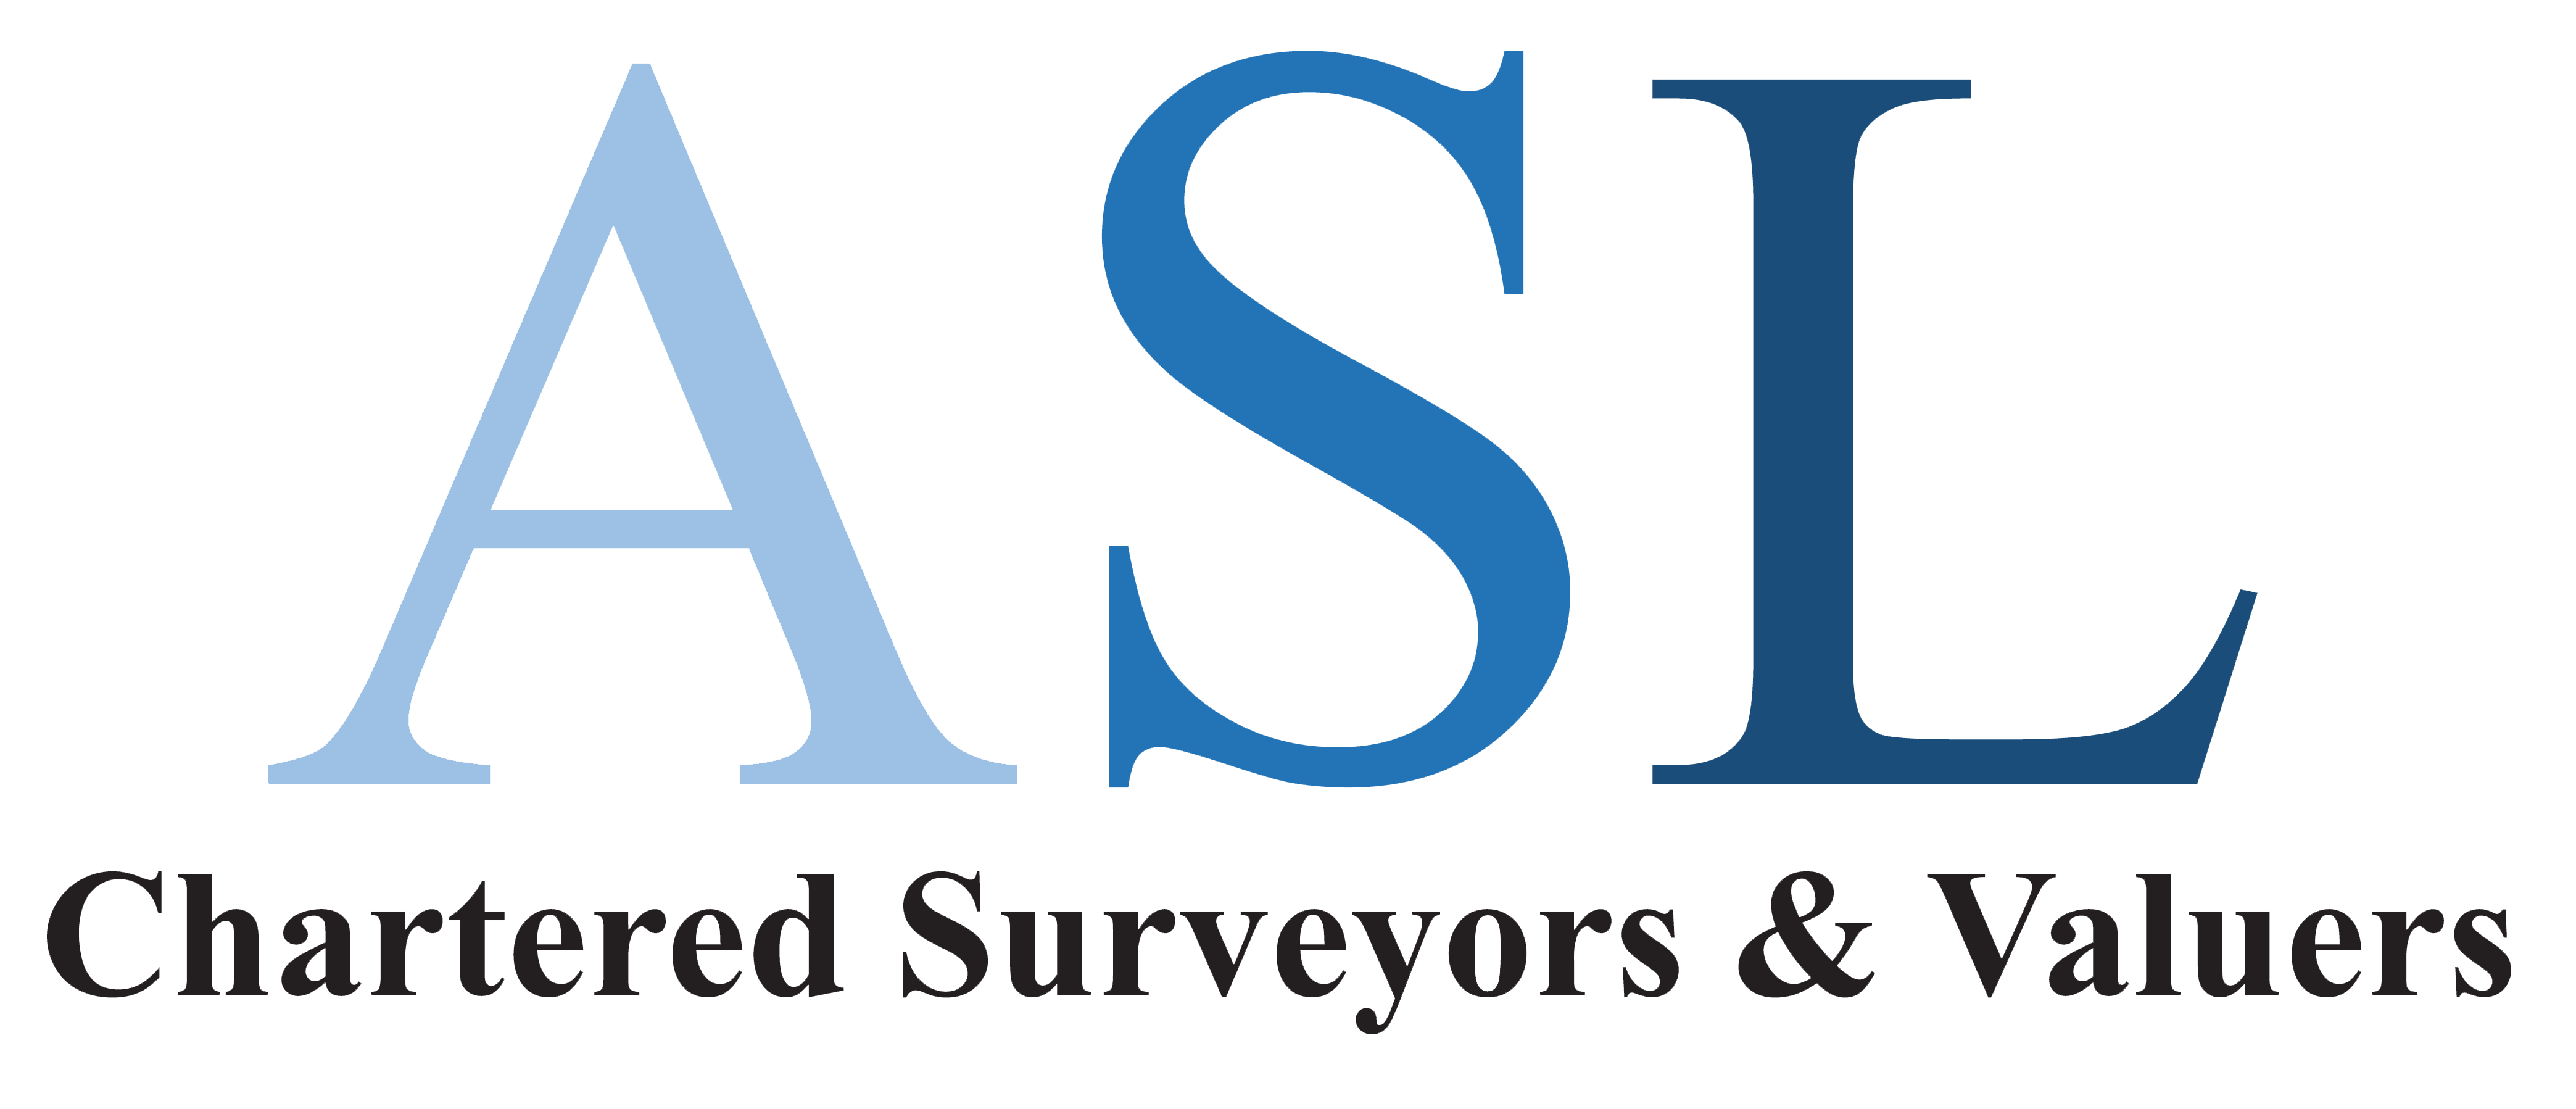 ASL,Ashall,ASL Chartered Surveyors,Chartered,Surveyors,Chartered Surveyors,Survey,Surveys,Assessment,Home Surveys,Commercial,Commercial Surveys,Home,Lease Renewals,Reviews,Retrofit,Assessments,RICS,services,Home Survey,Reports,Level 1,Level 2,Level 3,Party Wall,Residential,Red Book,Valuations